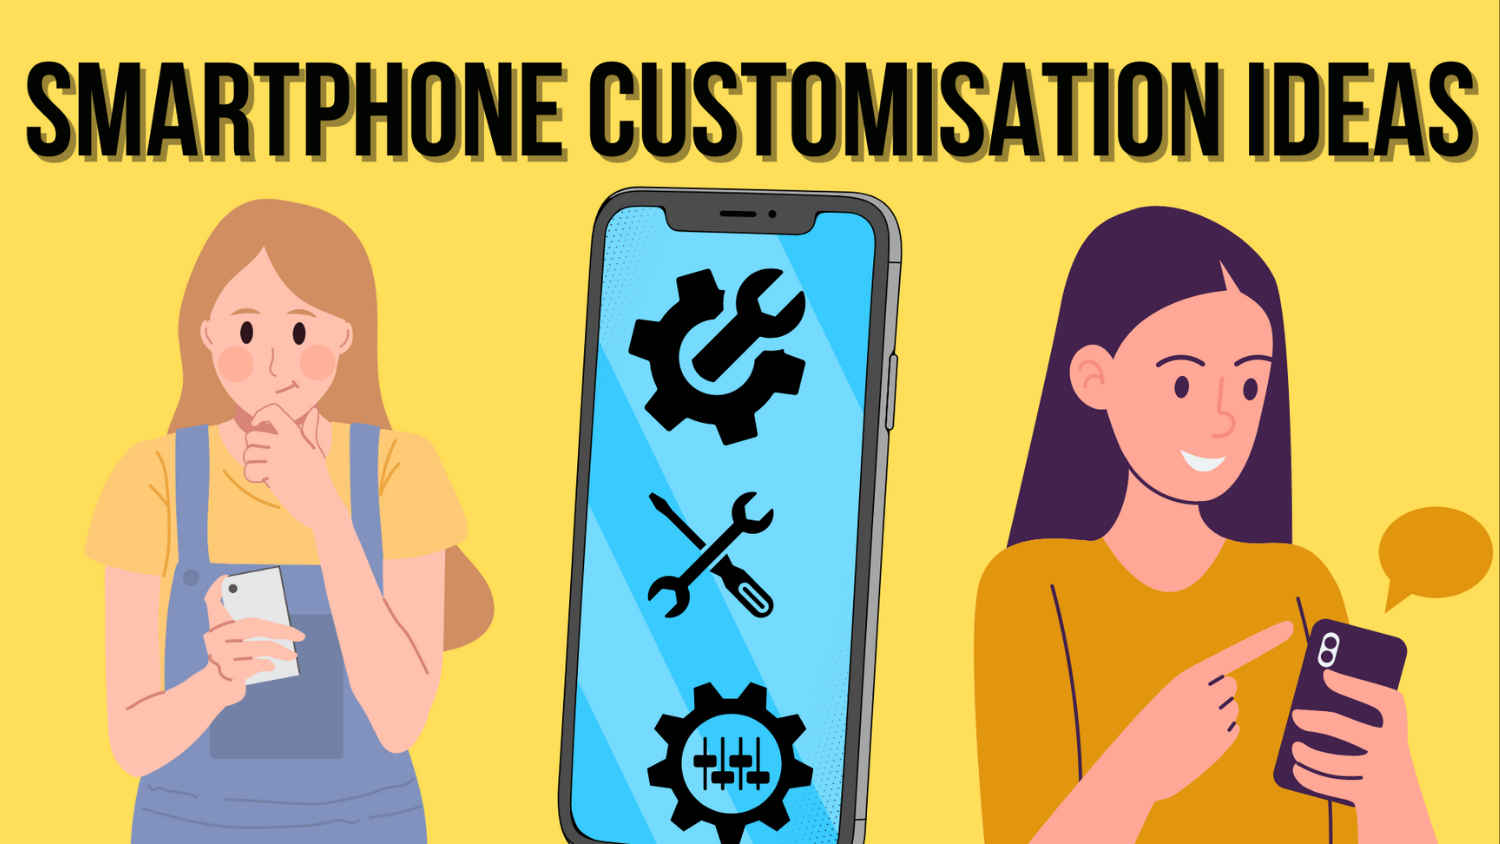 Smartphone customisation ideas for young consumers